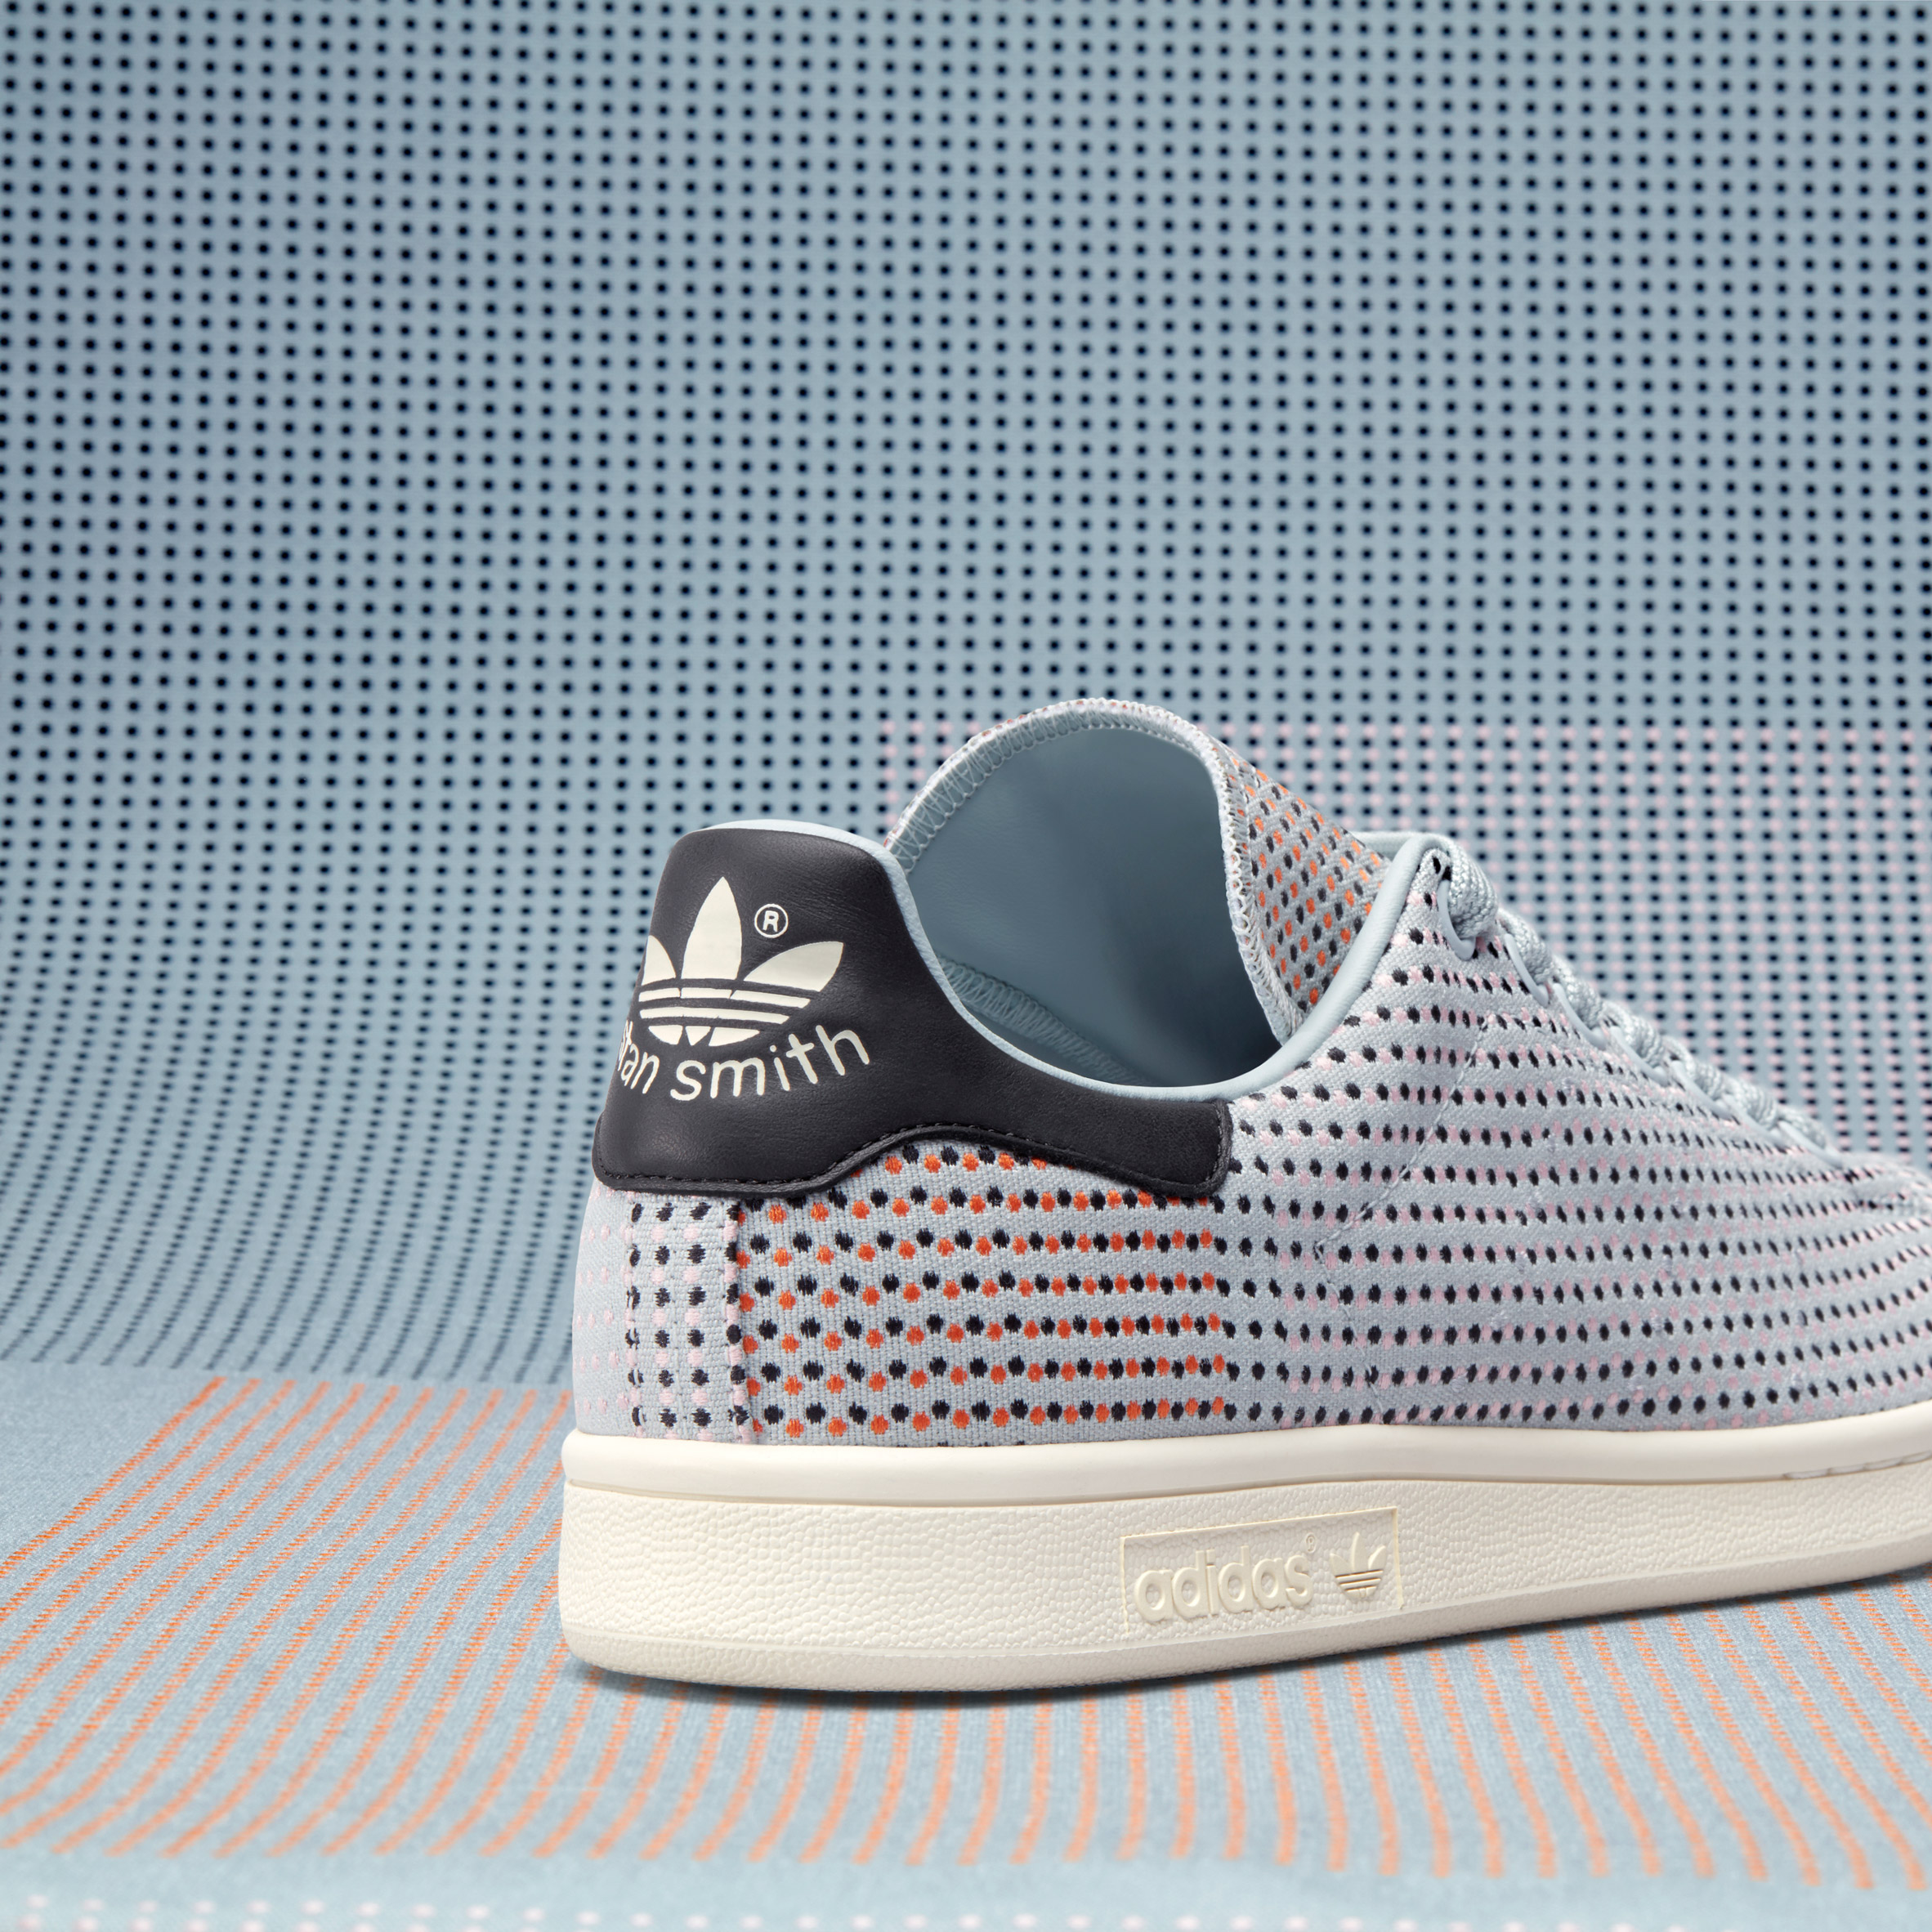 unveils special-edition Stan Smith trainers with Kvadrat fabric